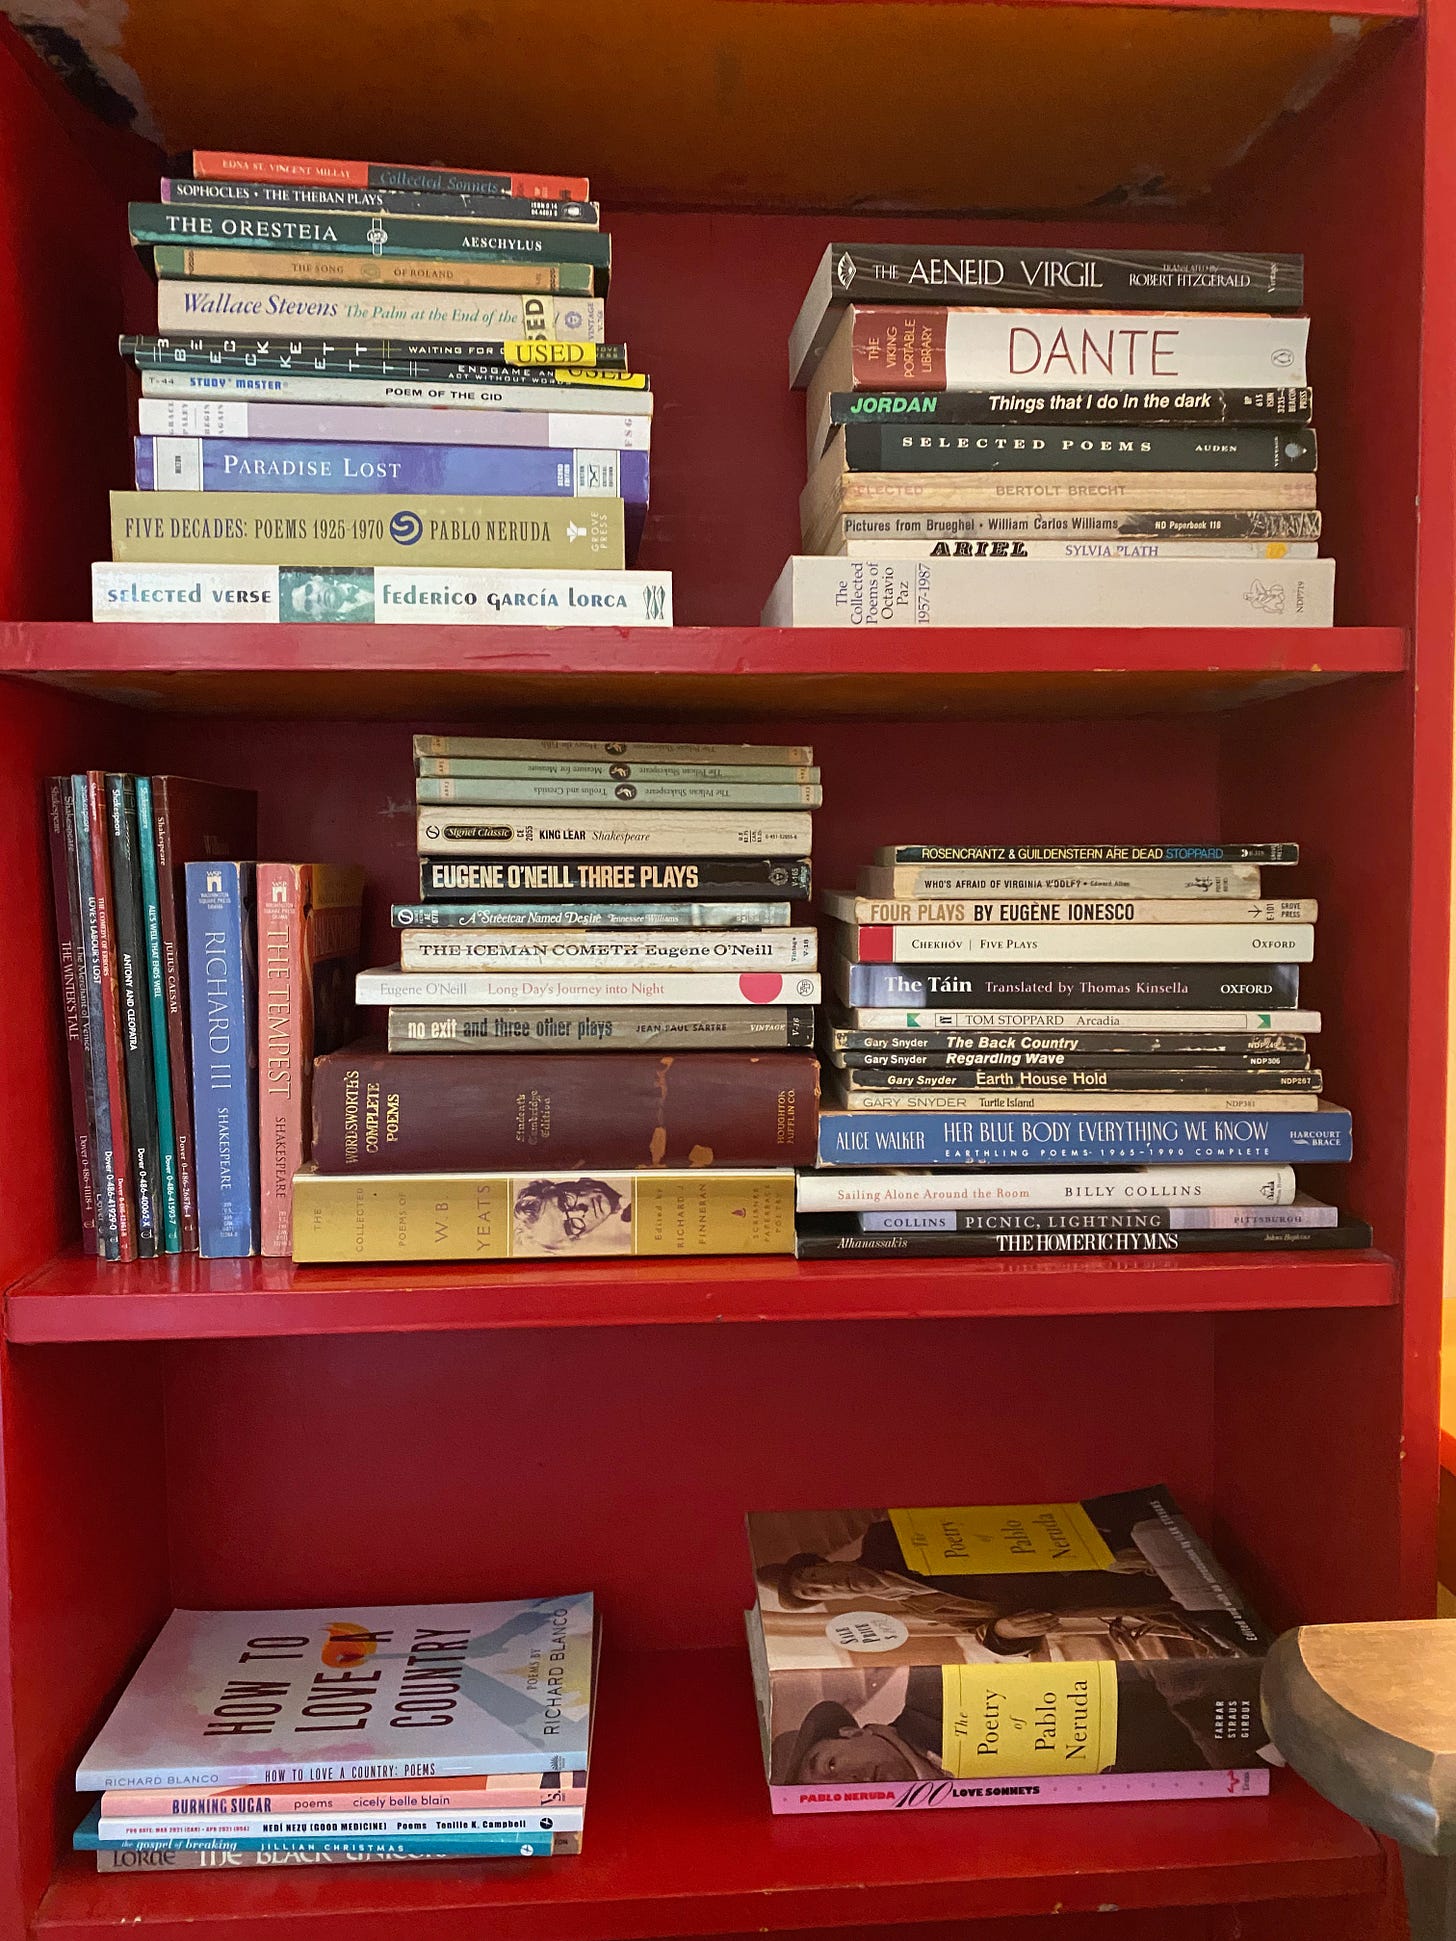 A red bookshelf full of stacks of books of varying shapes and sizes.